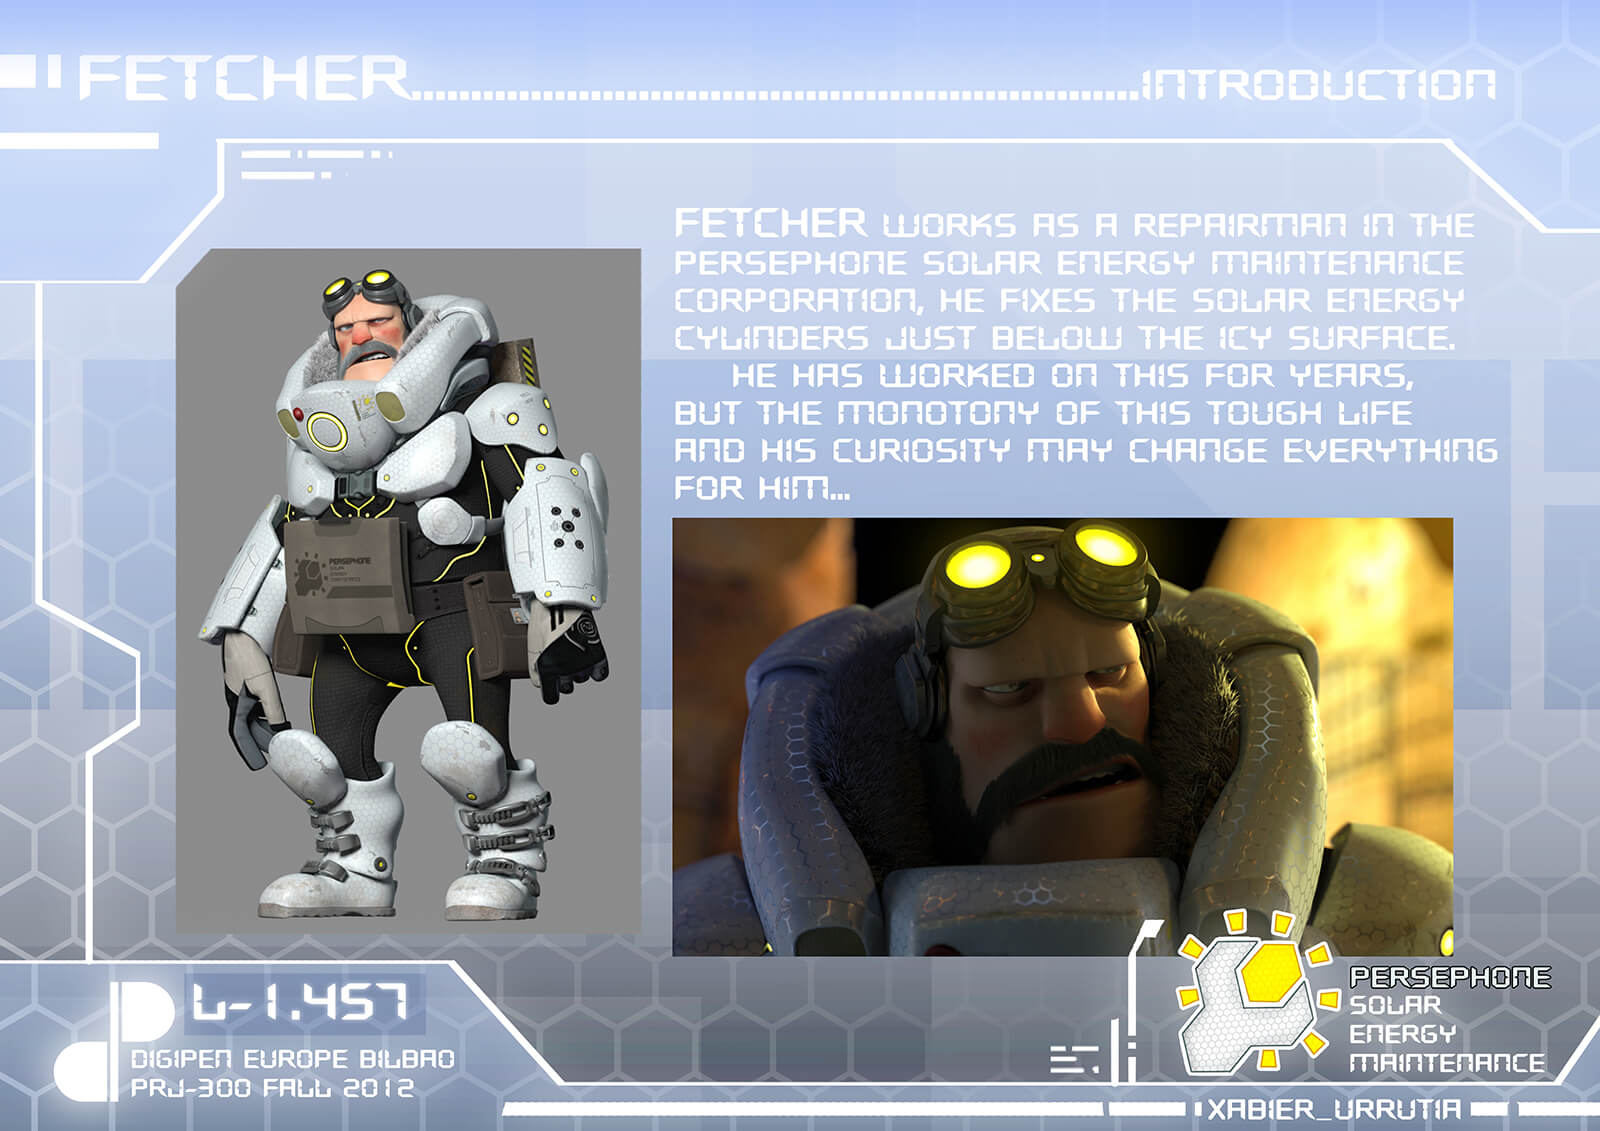 Character and story introduction slide from the film Level 1457 of Fetcher, a bearded man in white and black futuristic armor